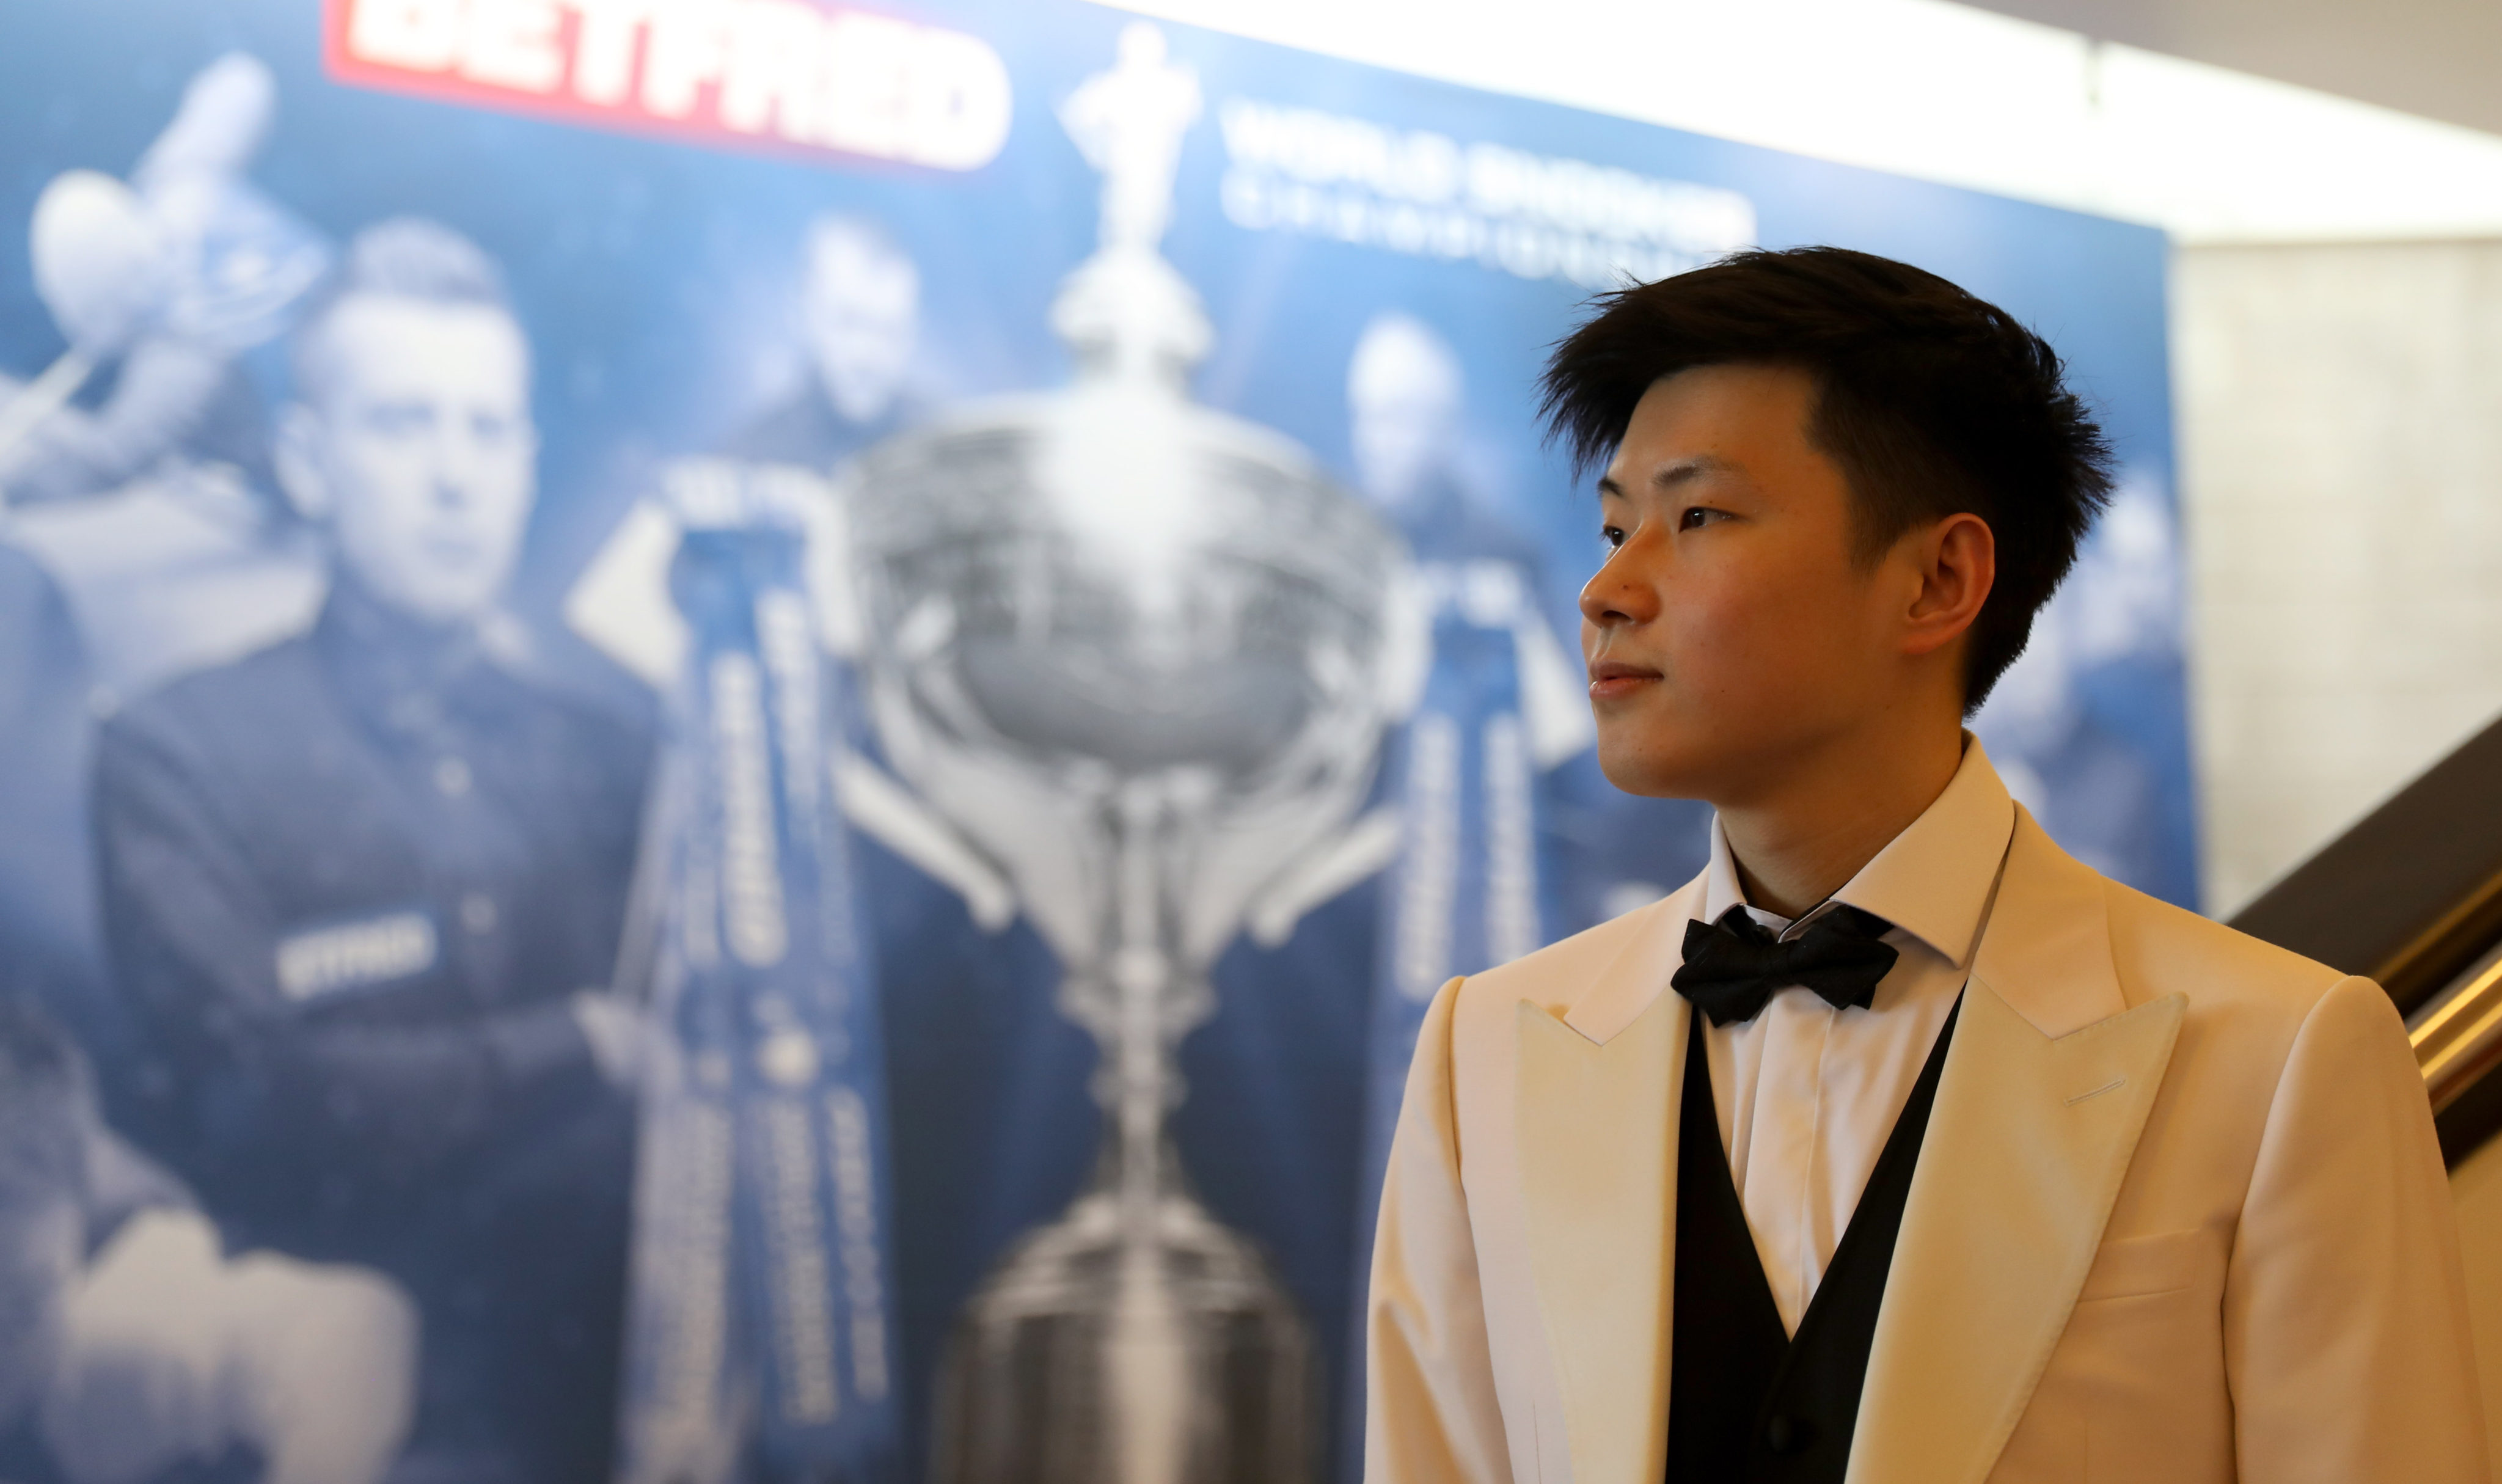 Zhao Xintong is one of four Chinese players competing at the 2022 World Snooker Championship in Sheffield. Photo: Xinhua